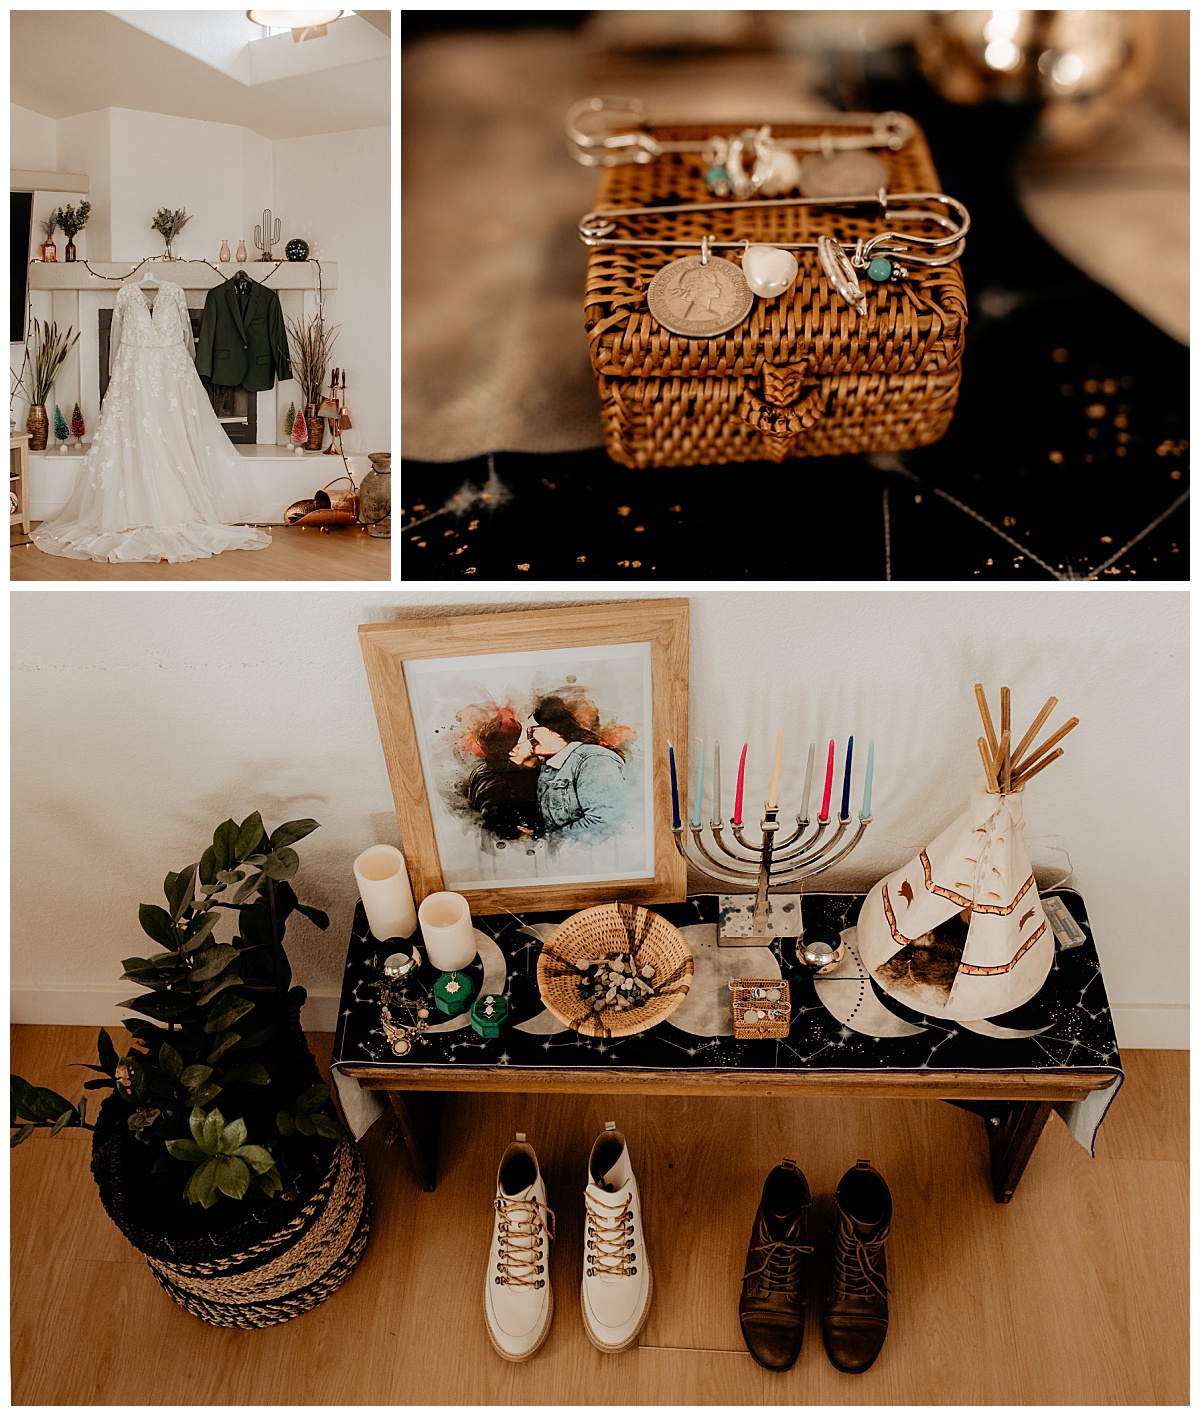 wedding attire details sit on bench with framed portrait of couple by Brea Warren Photo